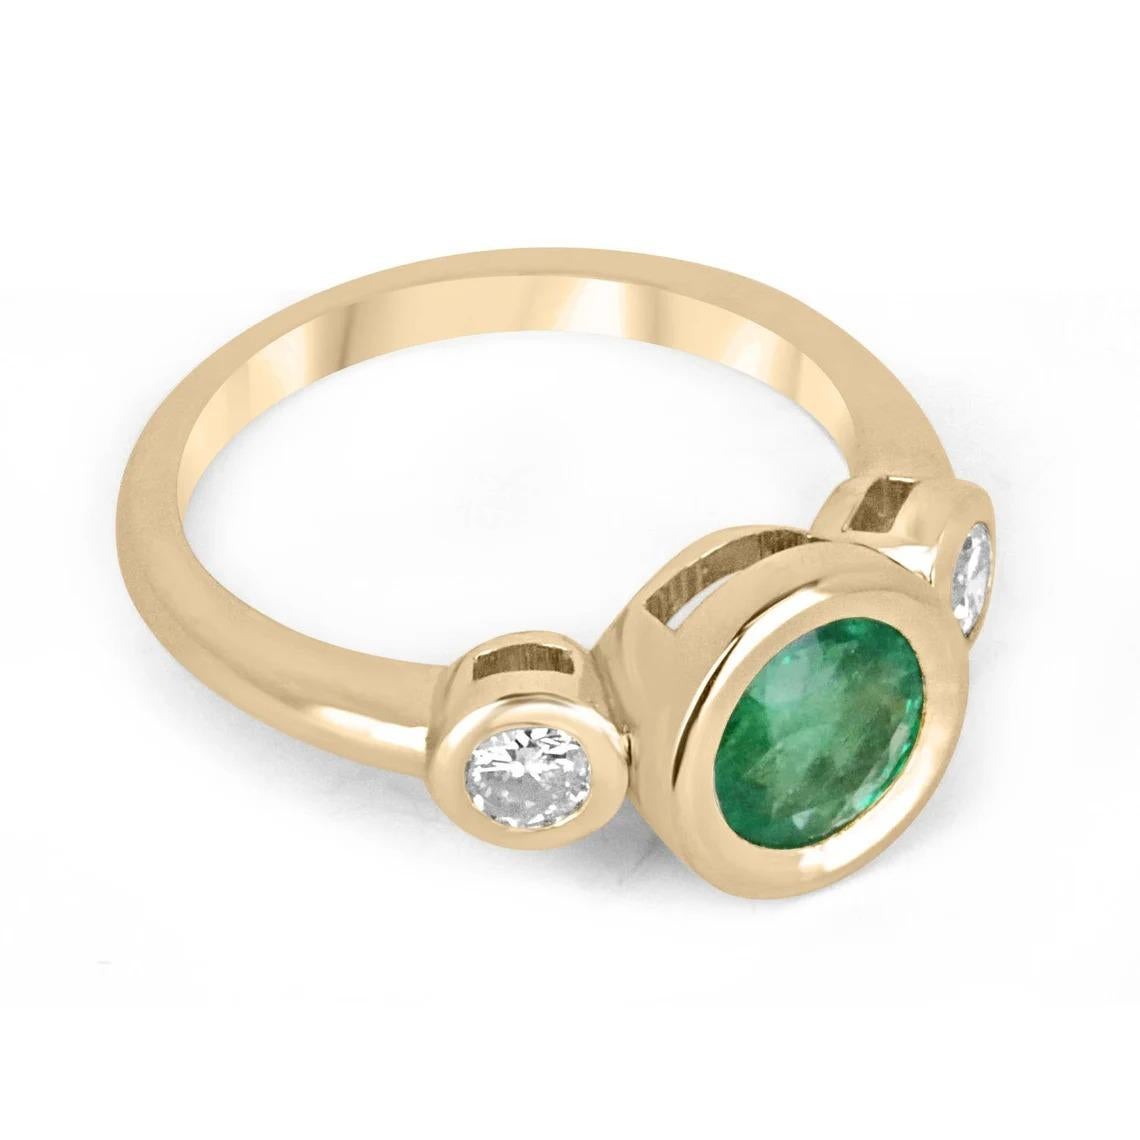 This three-stone ring features a gorgeous 1.45-carat round-cut emerald as its centerpiece, with a medium spring green color that catches the light beautifully. The emerald is flanked by two brilliant round-cut diamonds, adding extra sparkle and